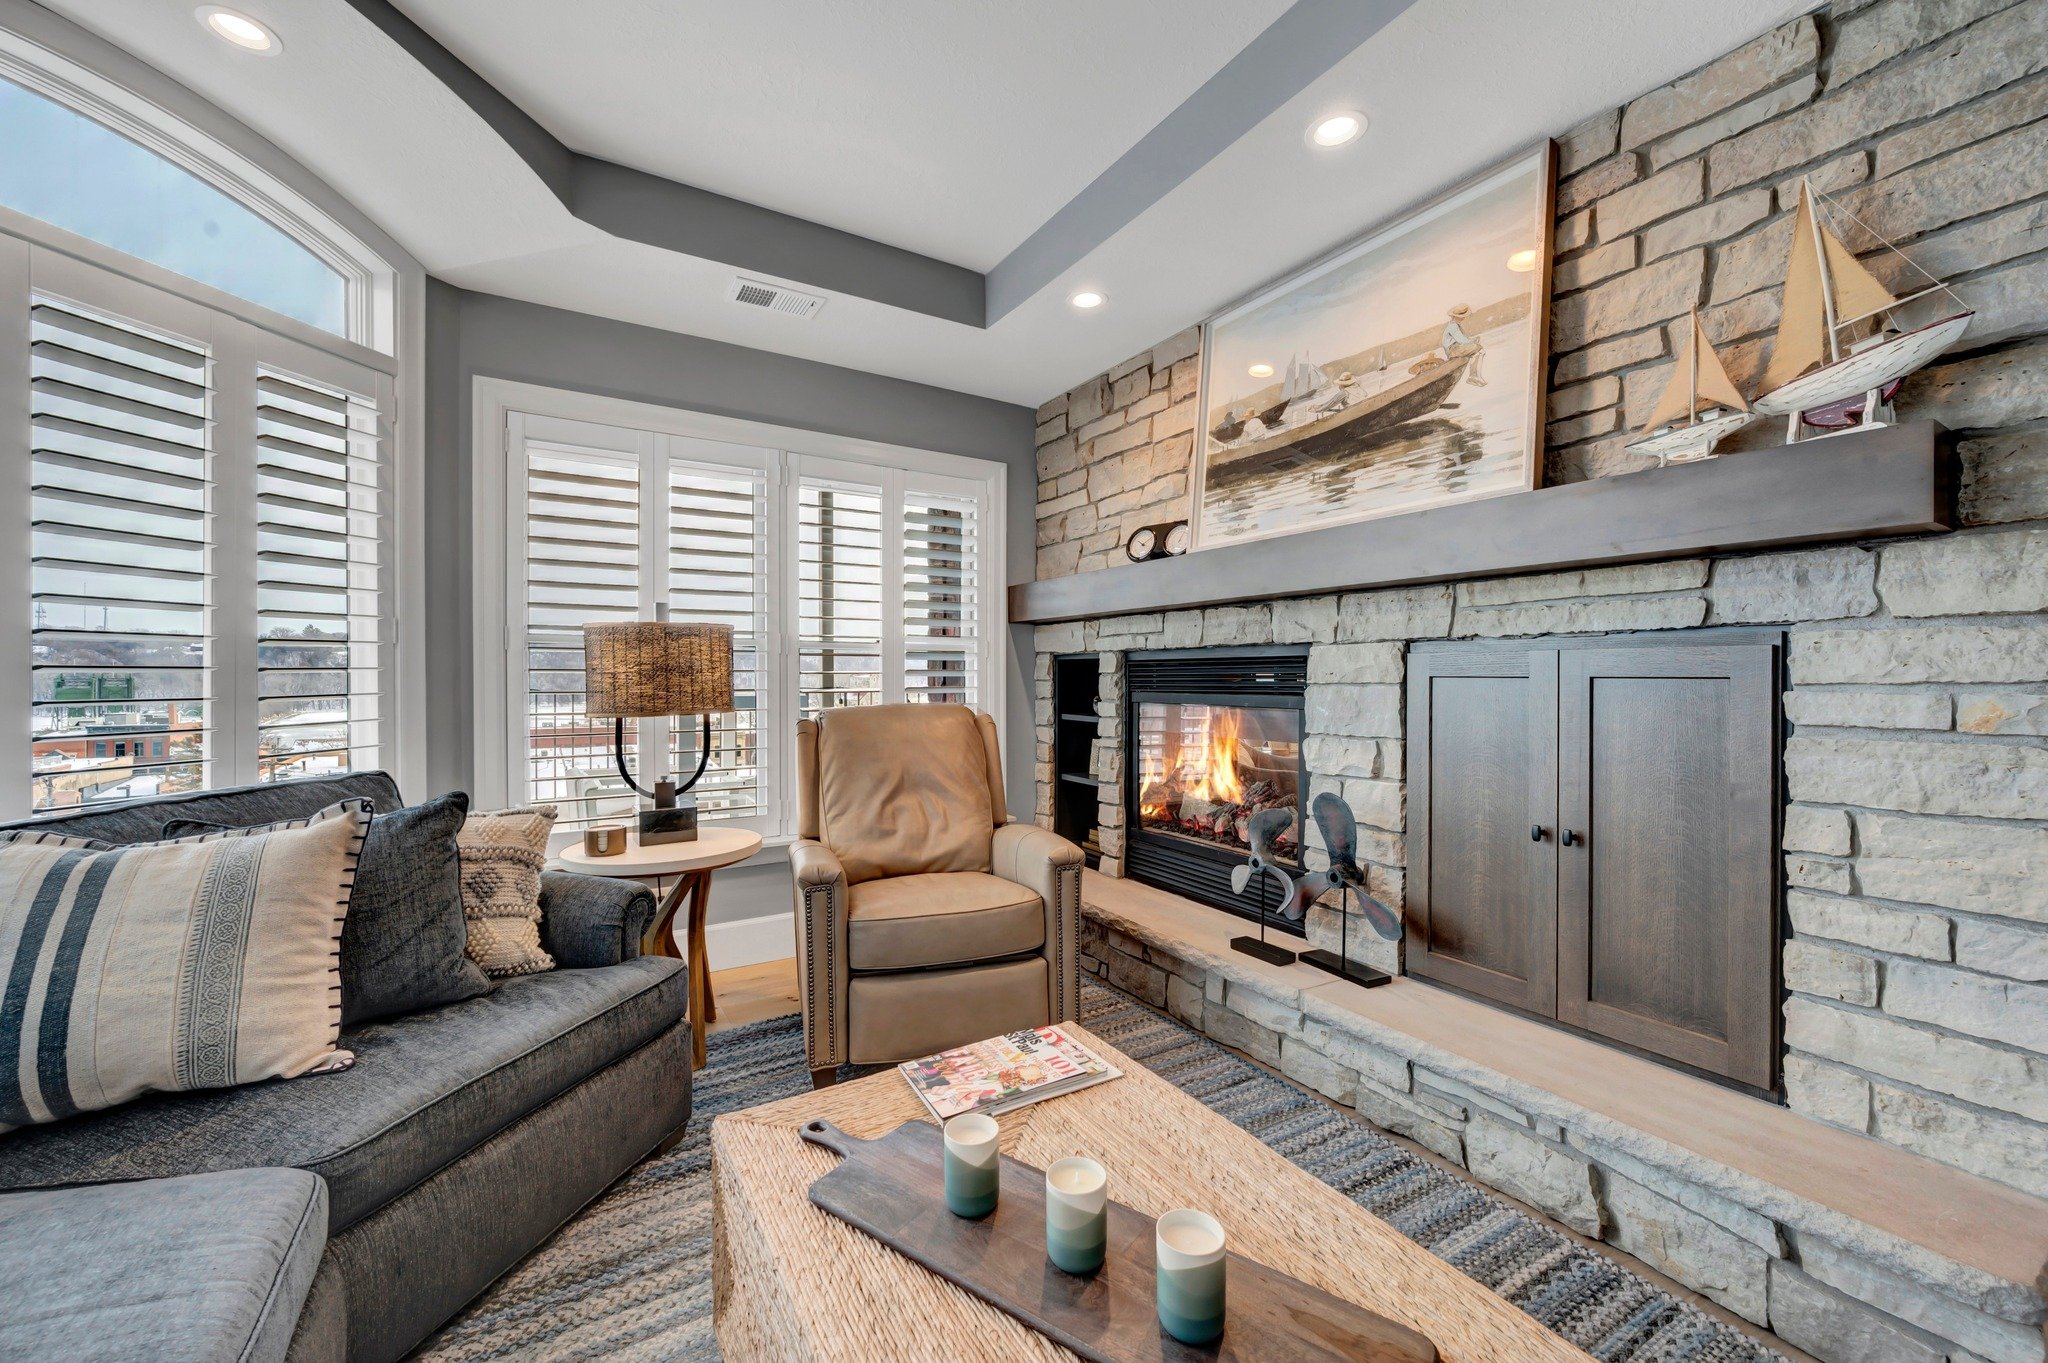 Are you are night in or a night out type of person? We are choosing a night in every time with this cozy living room! 🕯️☕

To learn more about our process and services, click the link in our bio 🔗 or give us a call (952) 937-0589.

#juliandesign #s